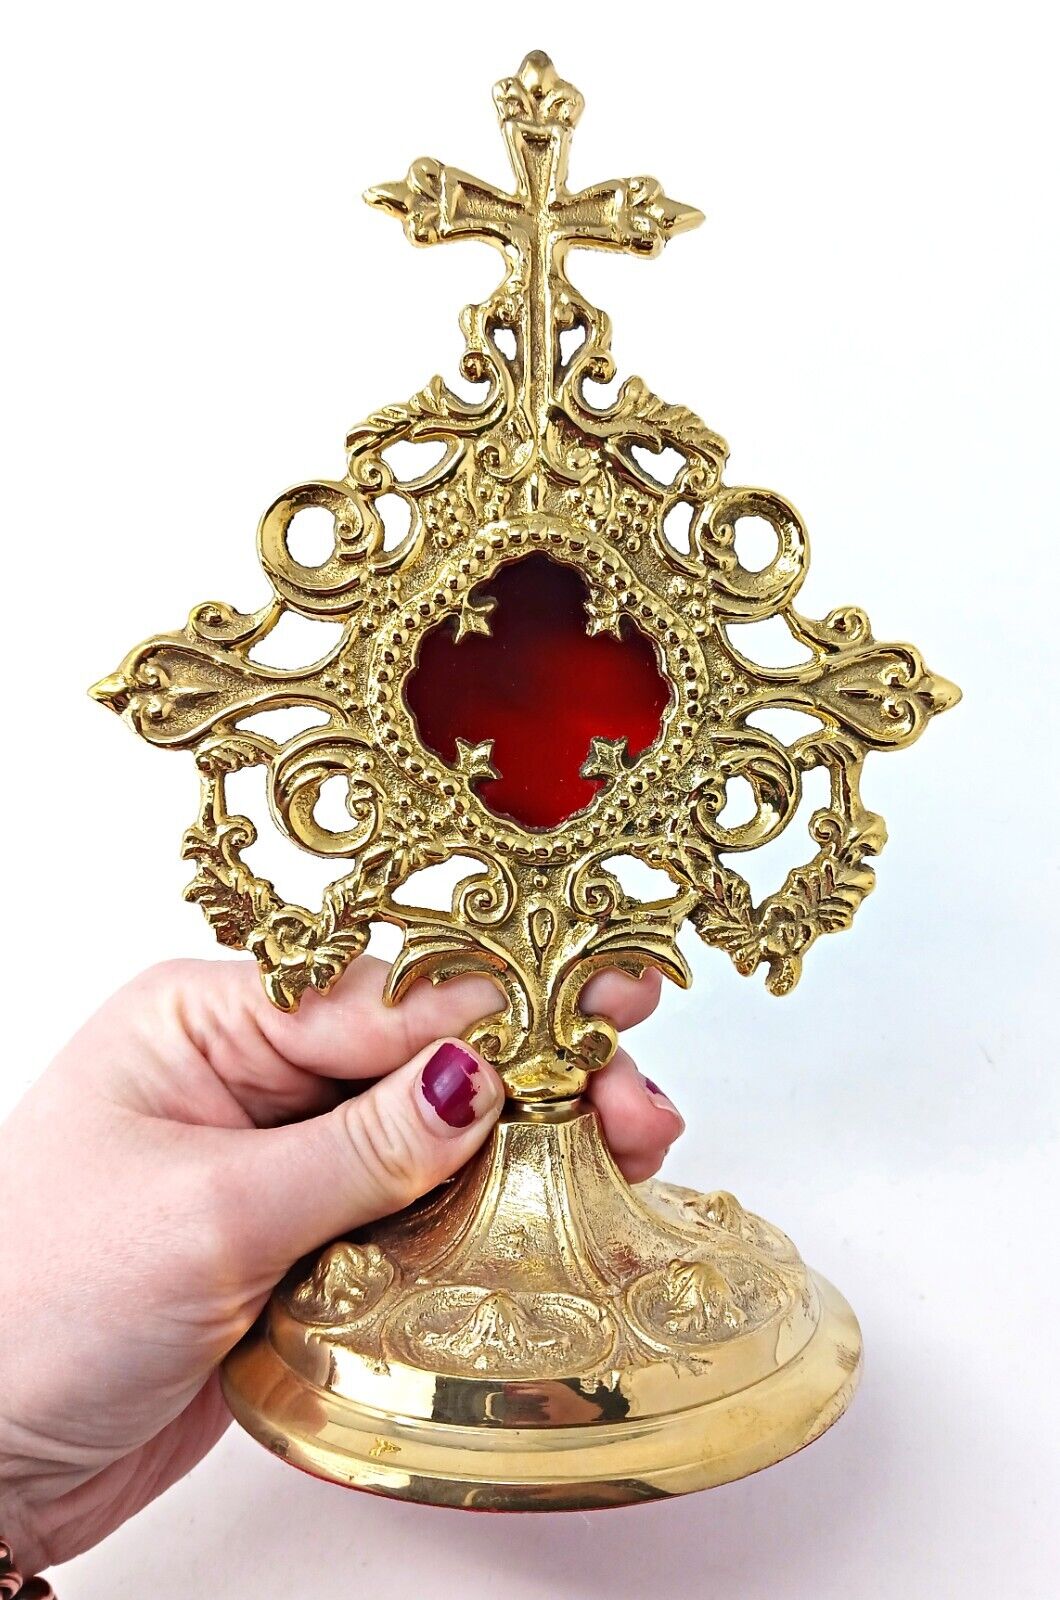 High Polished Brass Ornate Cross Topped Vine Reliquary for Church Use 9 In